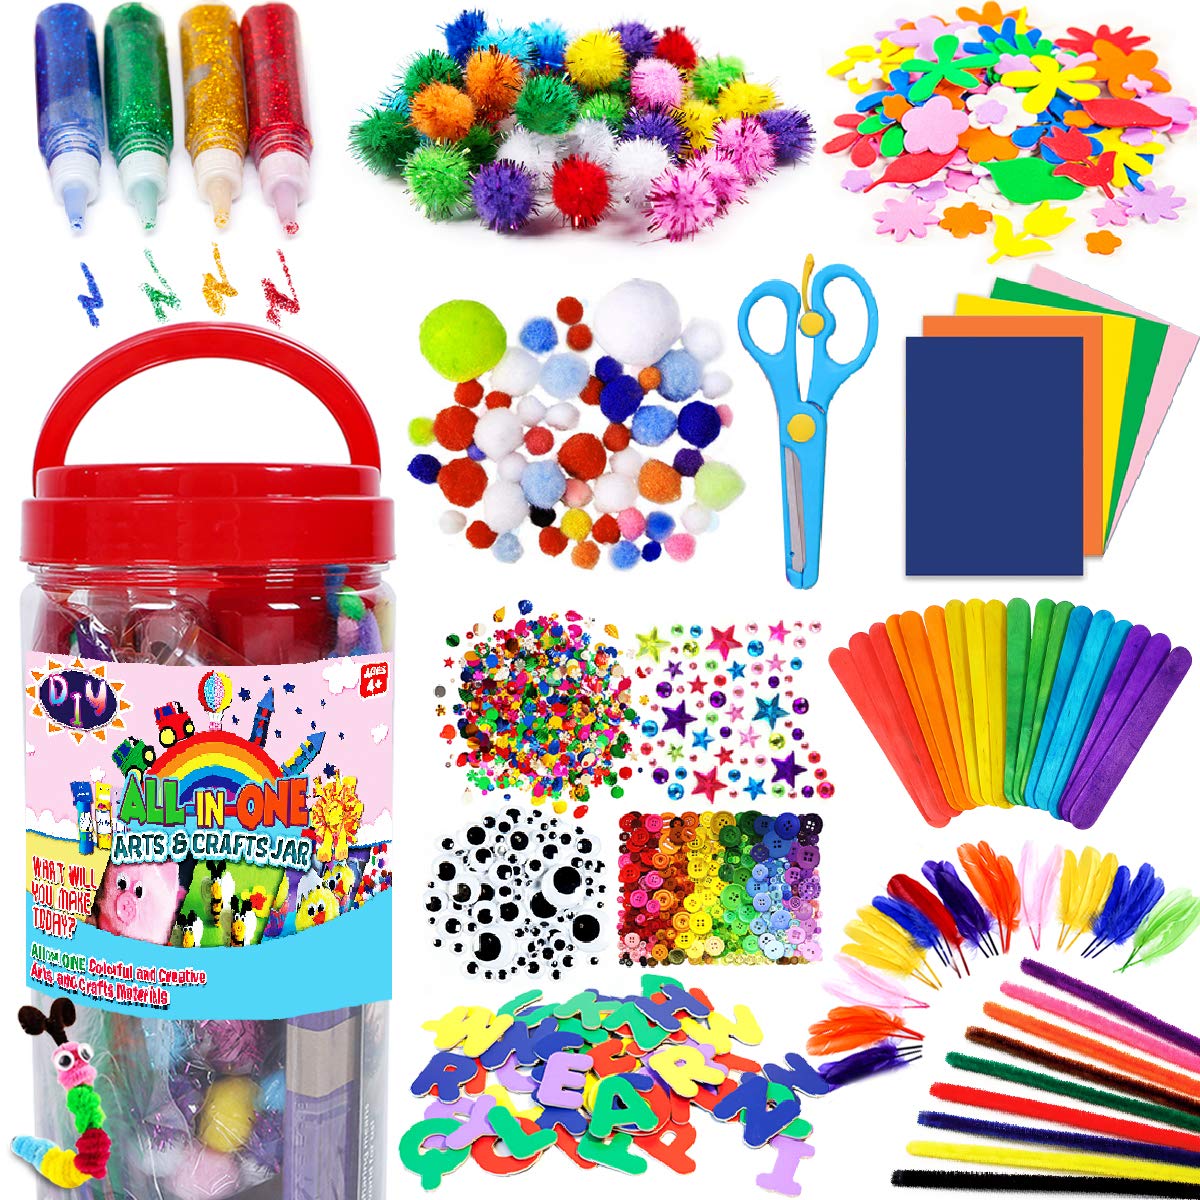 FunzBo Arts and crafts Supplies for Kids - craft Art Supply Kit for Toddlers Age 4 5 6 7 8 9 - All in One DIY crafting School Ki